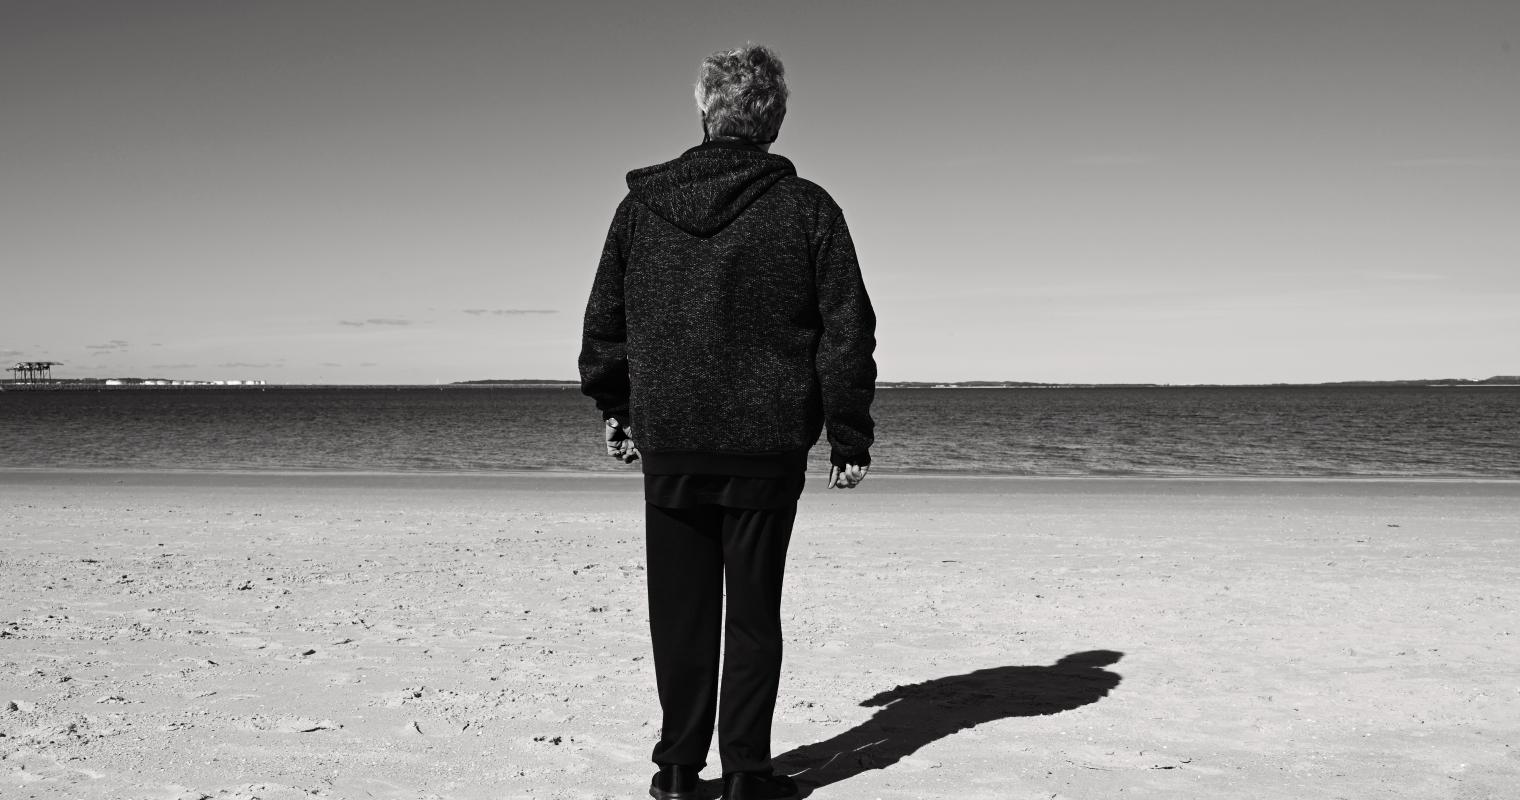 image of a person on a beach